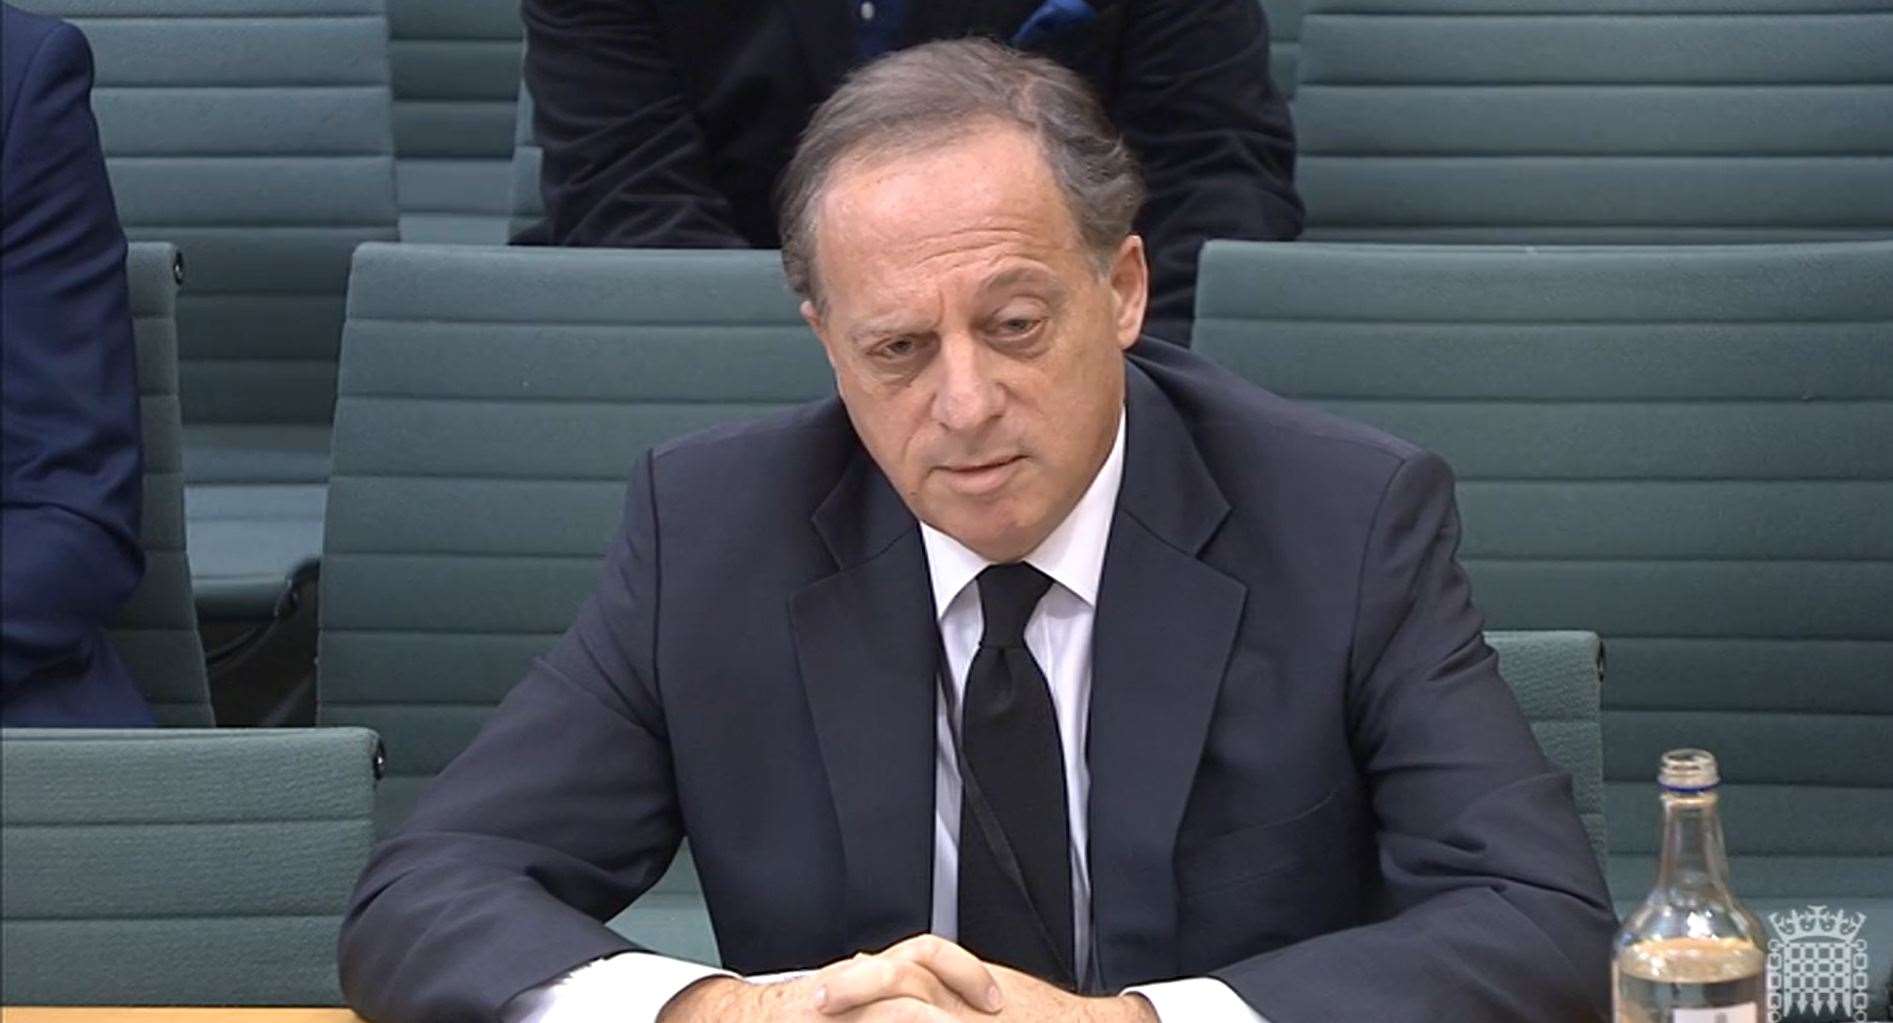 BBC chairman Richard Sharp appearing before the Commons Digital, Culture, Media and Sport (DCMS) Committee (House of Commons/PA)